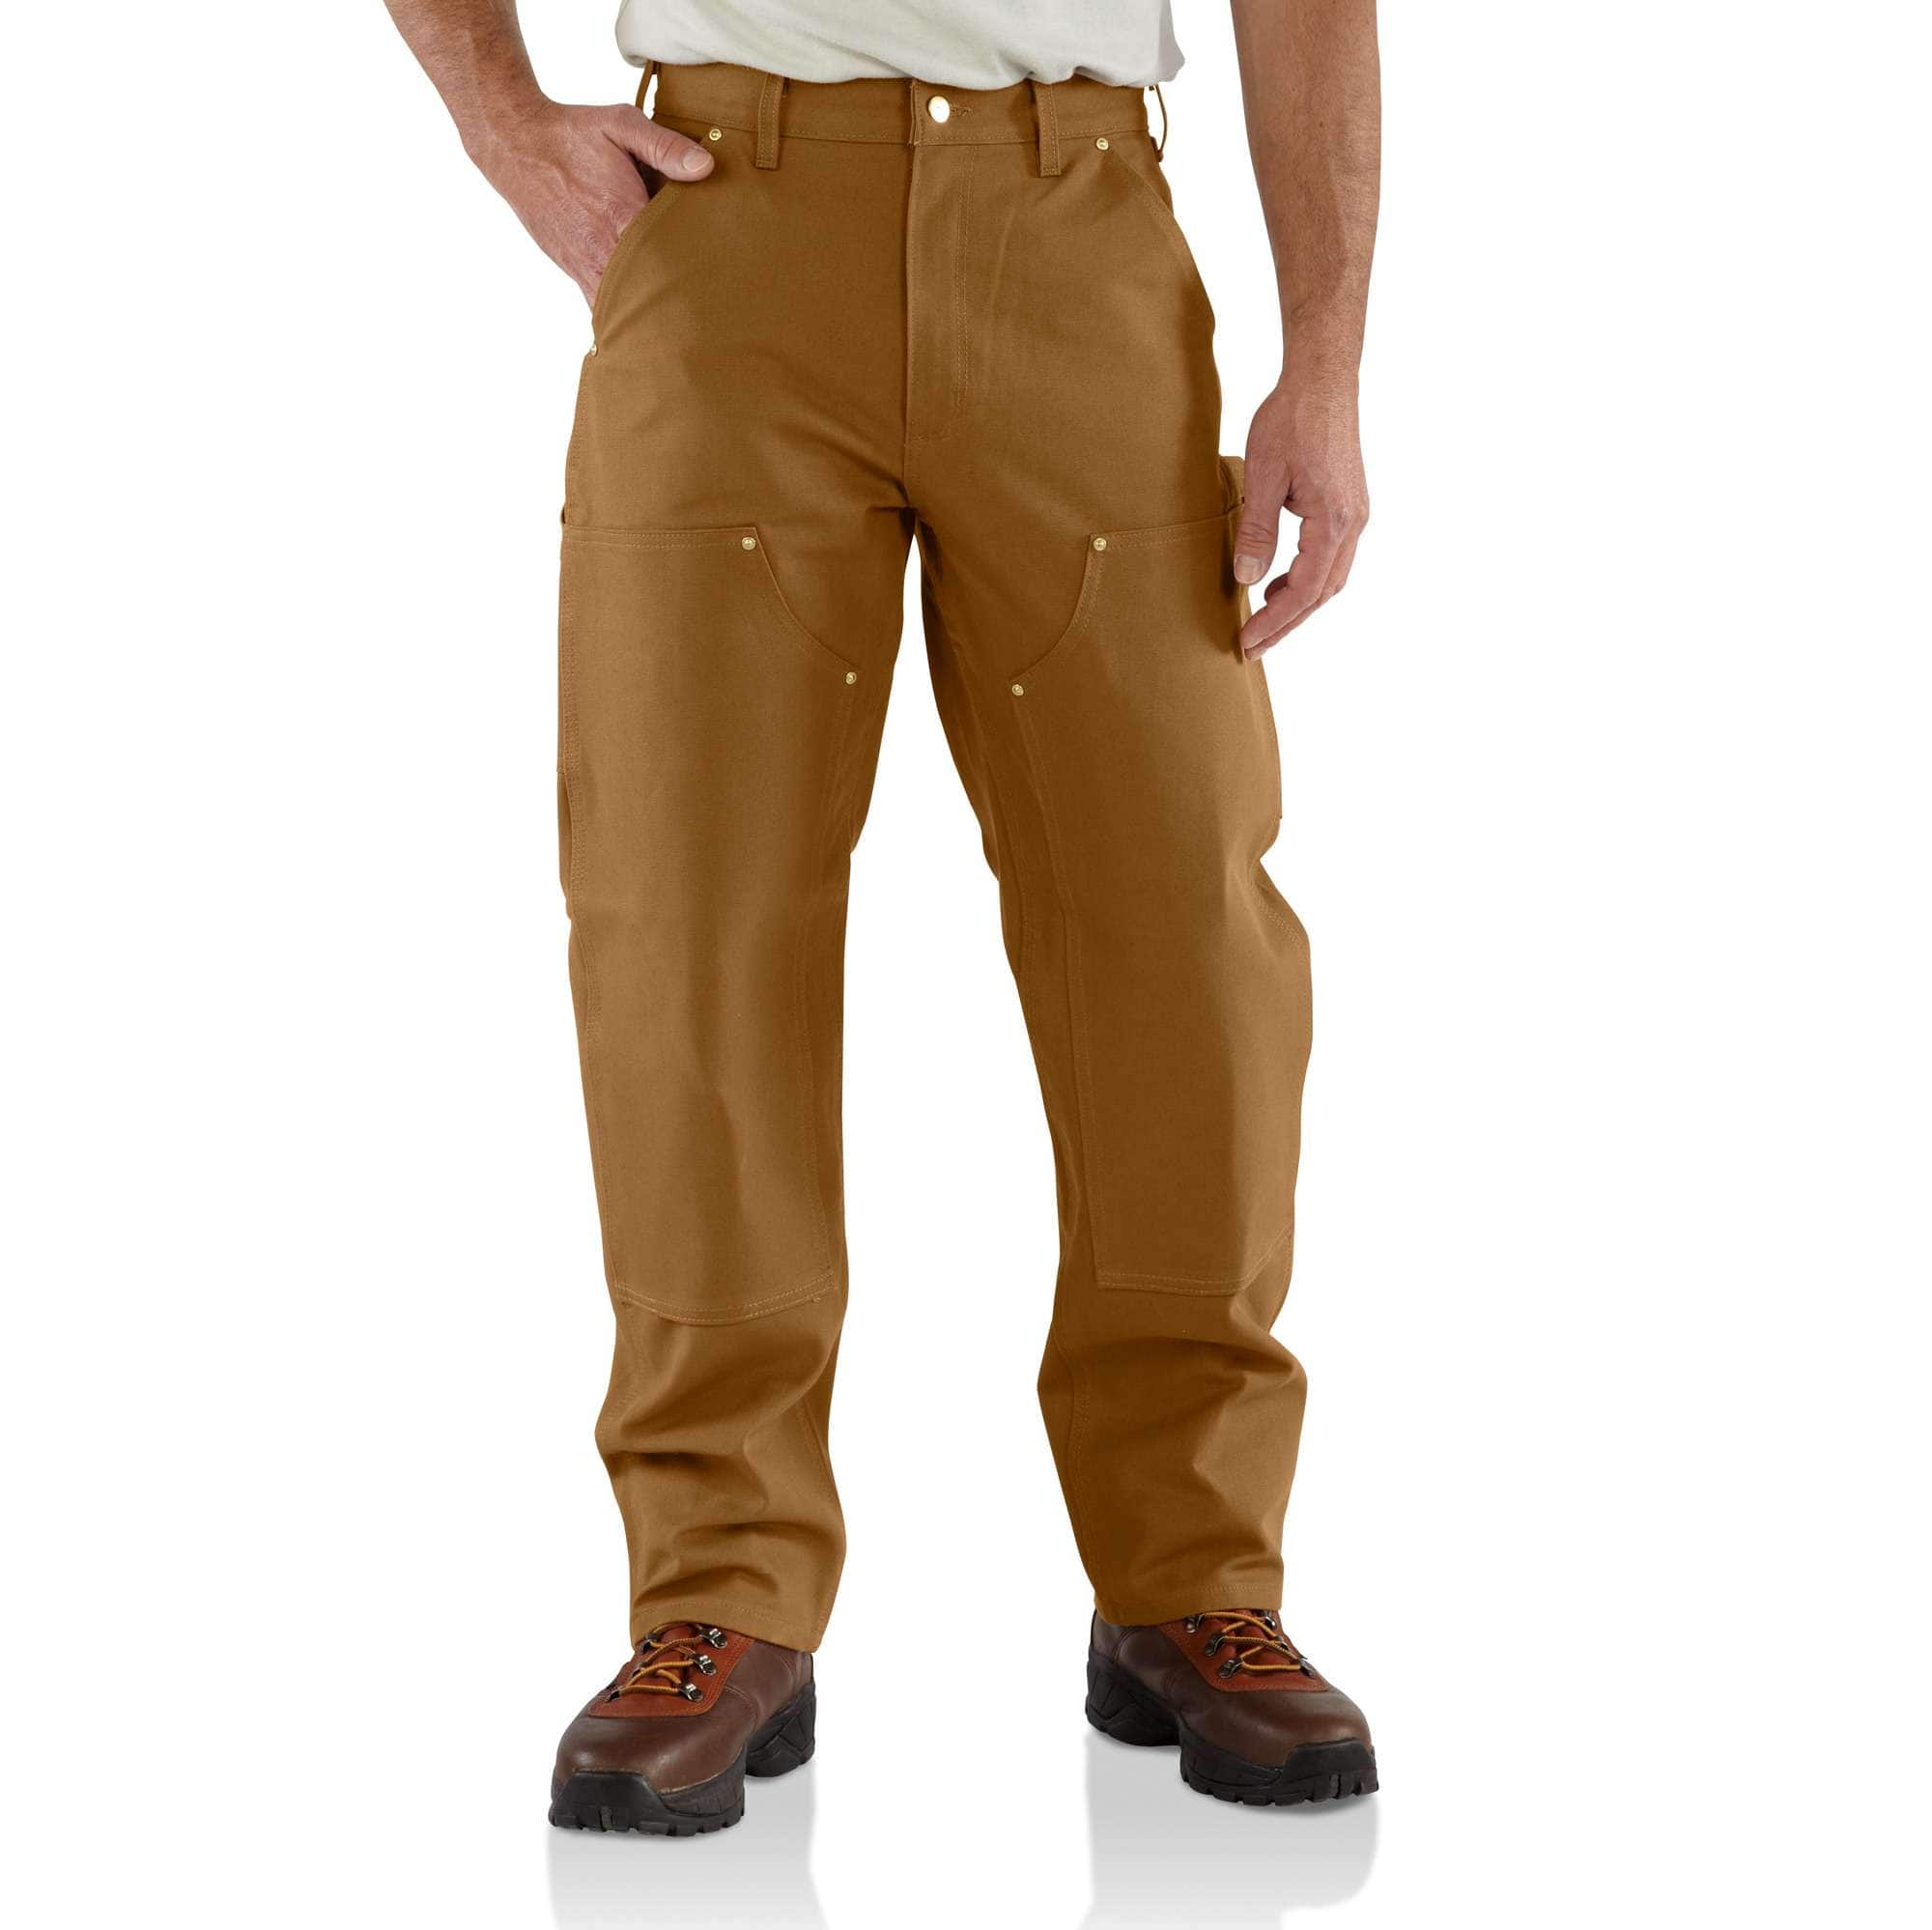 Carhartt Men's Loose Fit Washed Duck Insulated Pant - Brown M / Brn / Sht